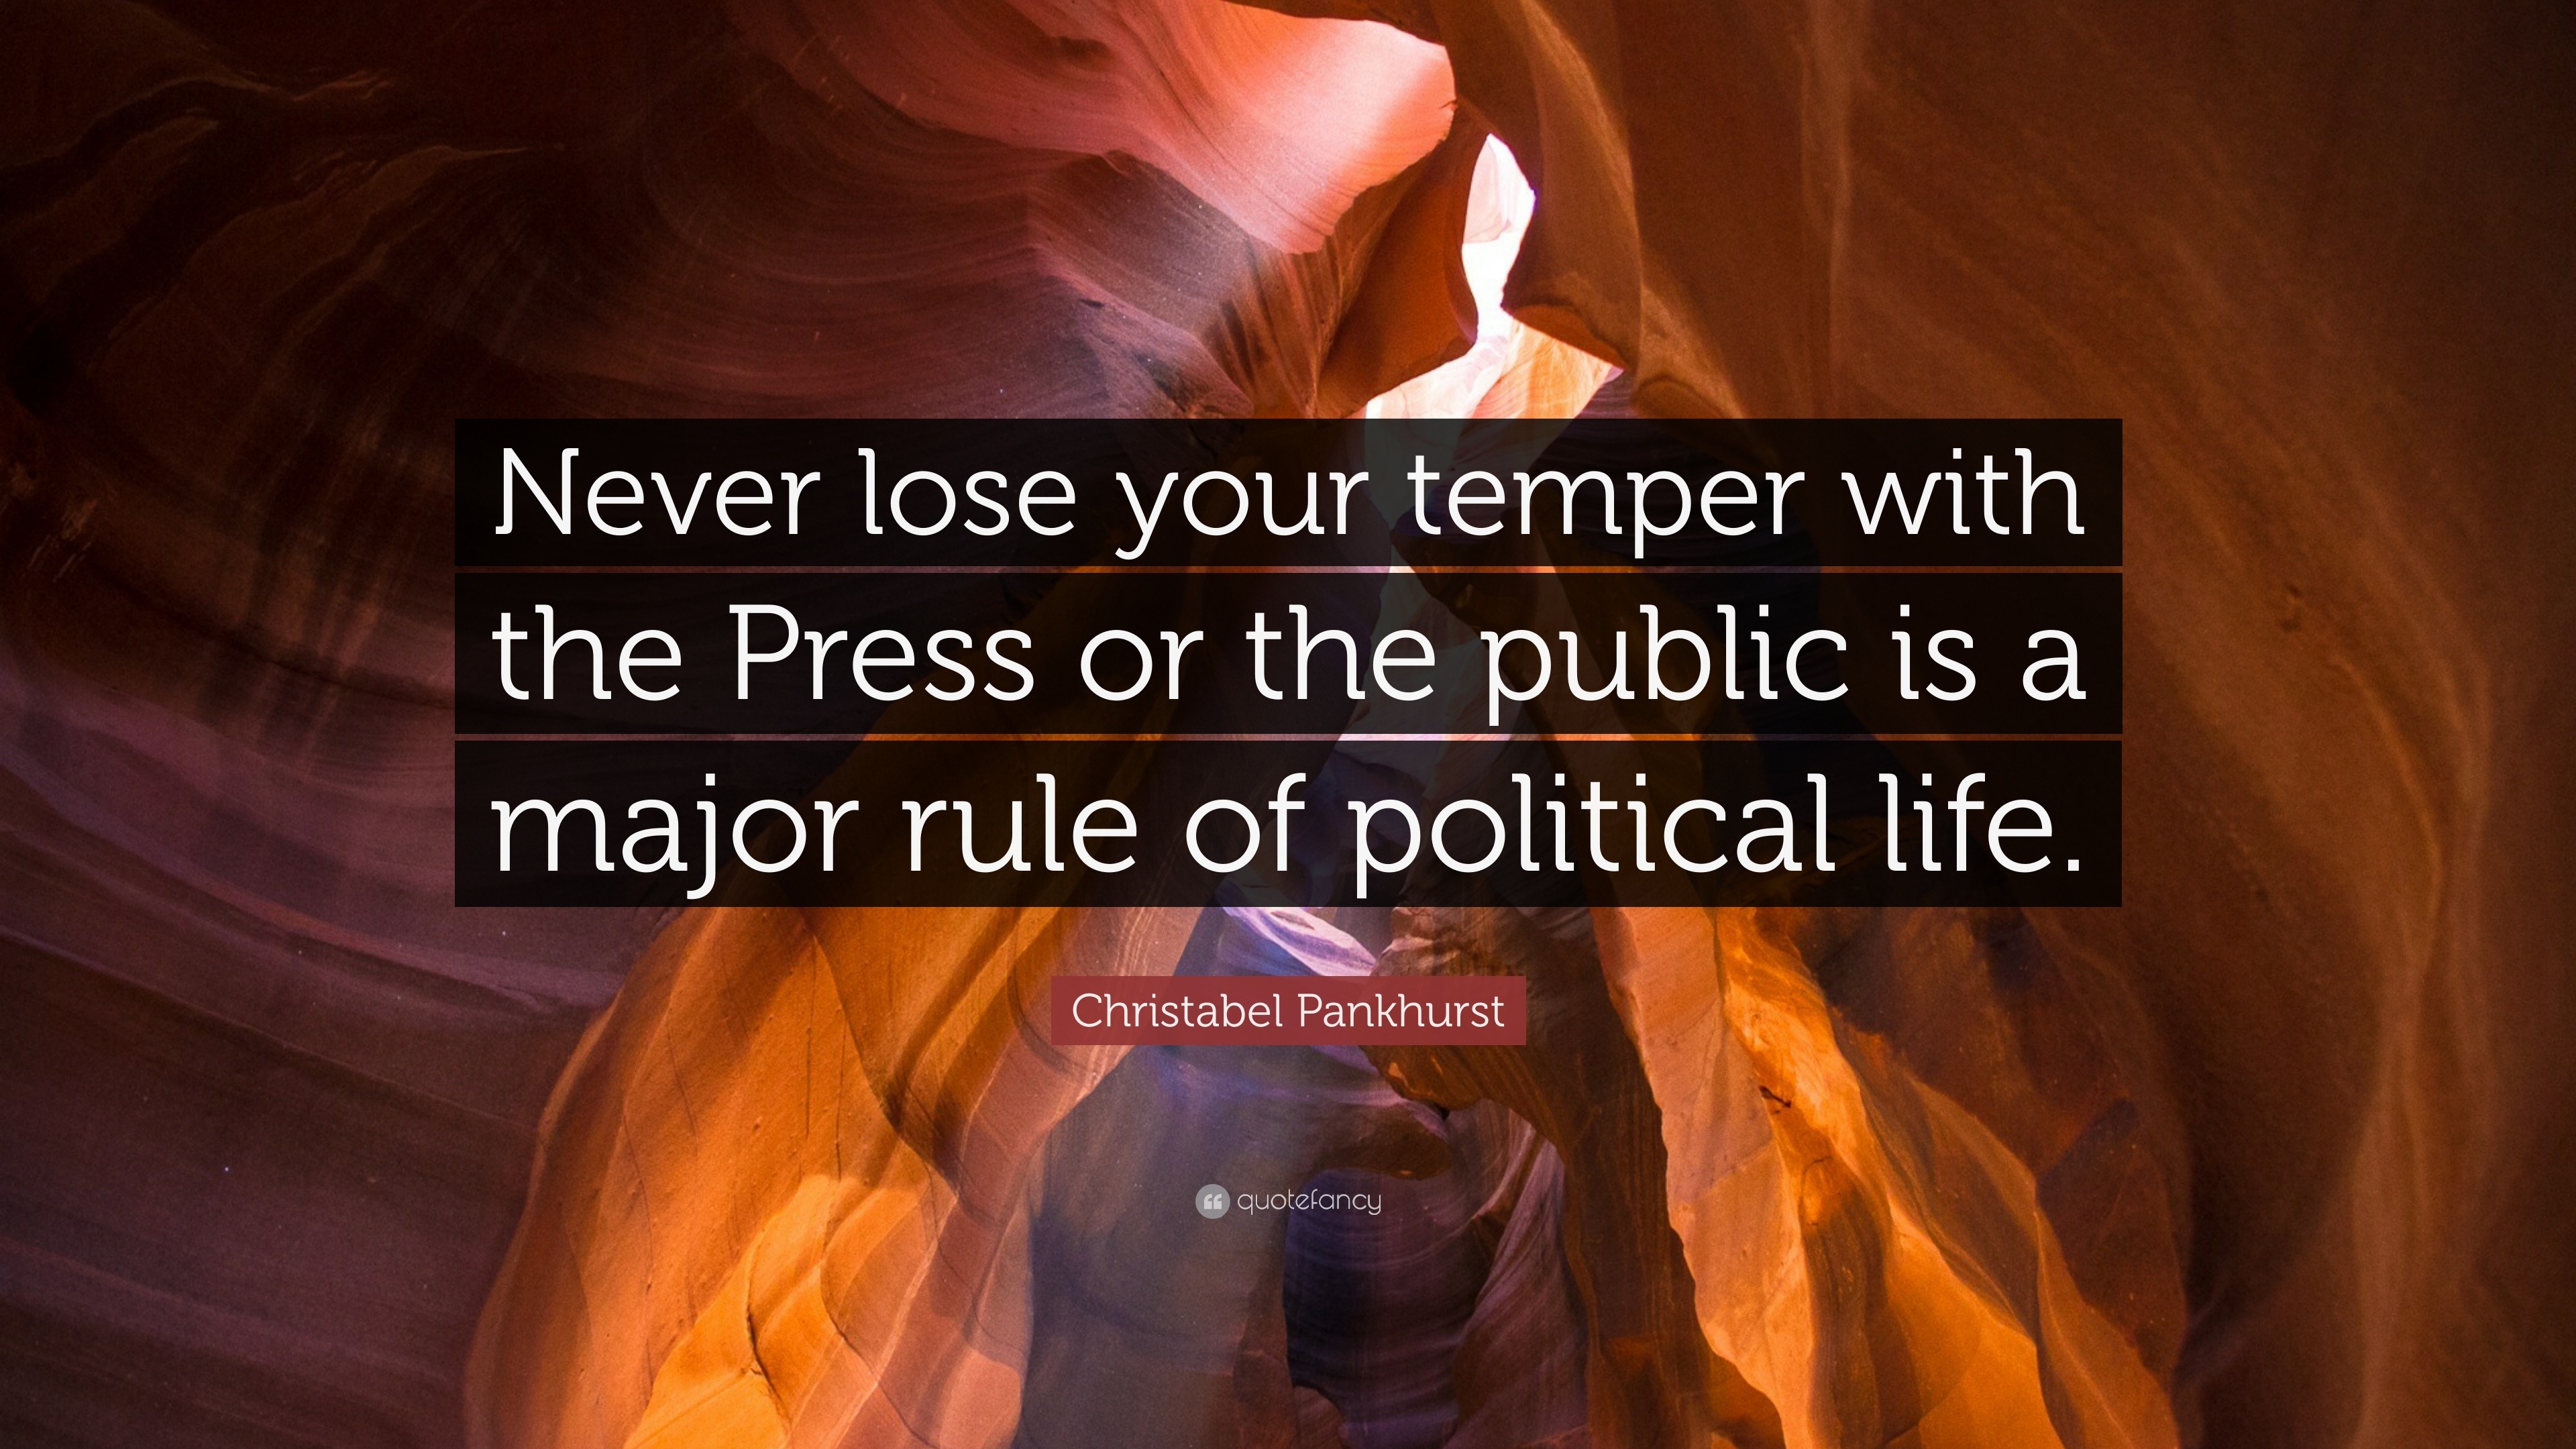 Christabel Pankhurst Quote: “Never Lose Your Temper With The Press Or The Public Is A Major